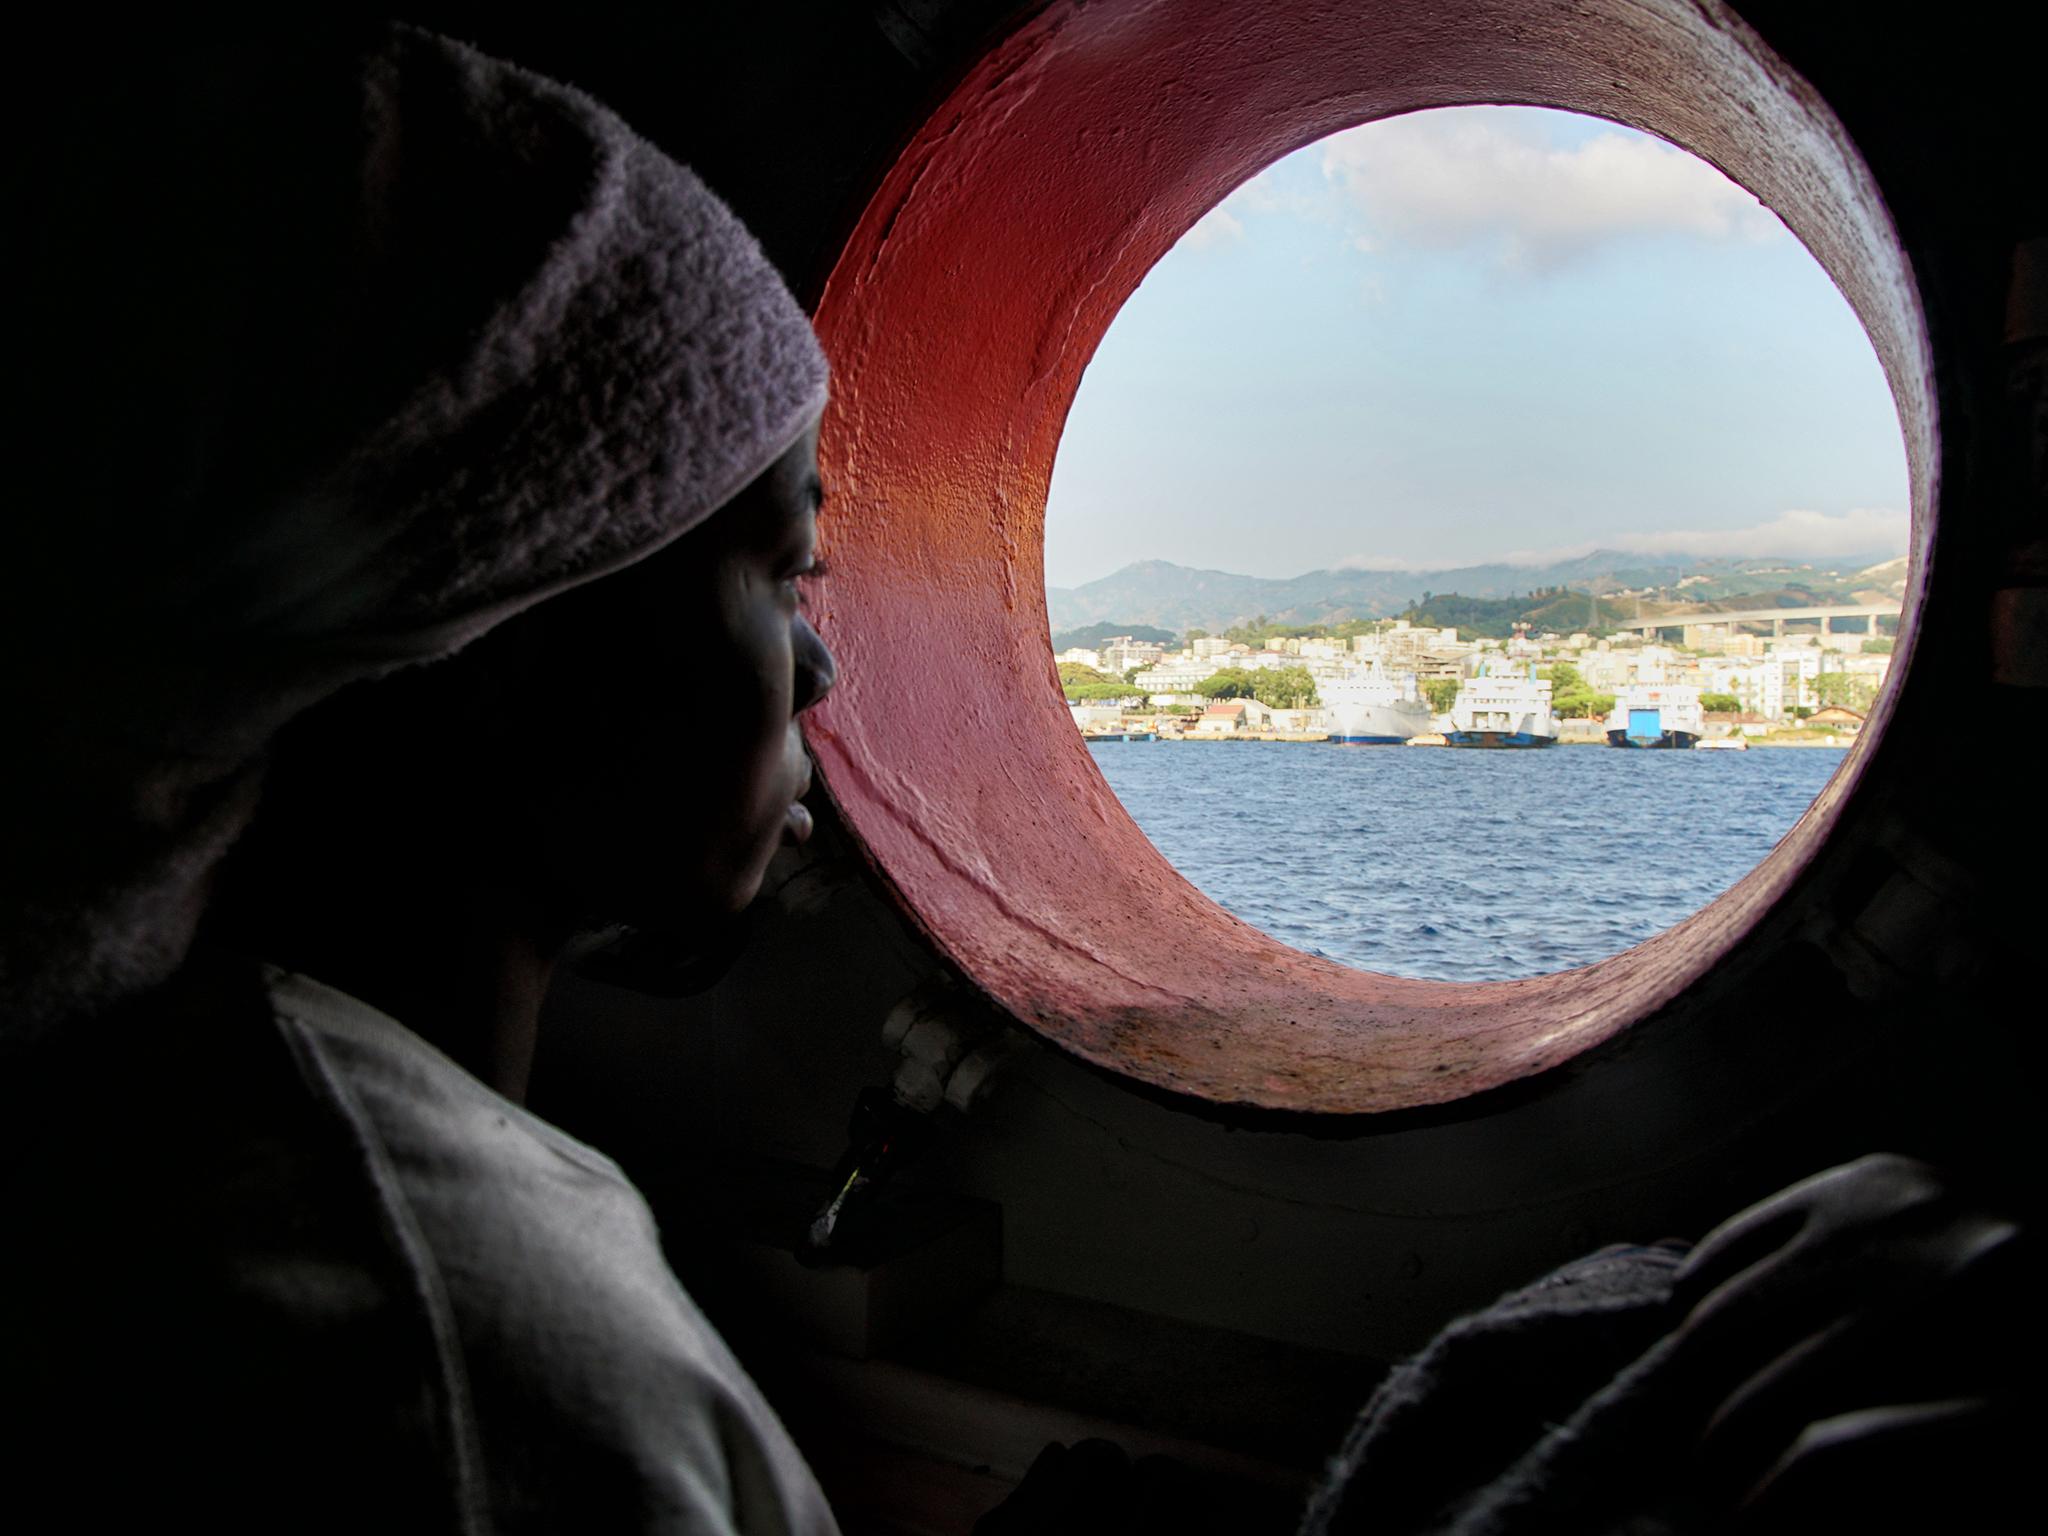 A woman looks out of the porthole from aboard the 'Aquarius' rescue vessel after arriving in Sicily, Italy, on Sunday June 25, 2016.  A group of more than 650 migrants arrived at port in Messina, Sicily, after being rescued from the Mediterranean Sea in June 2016